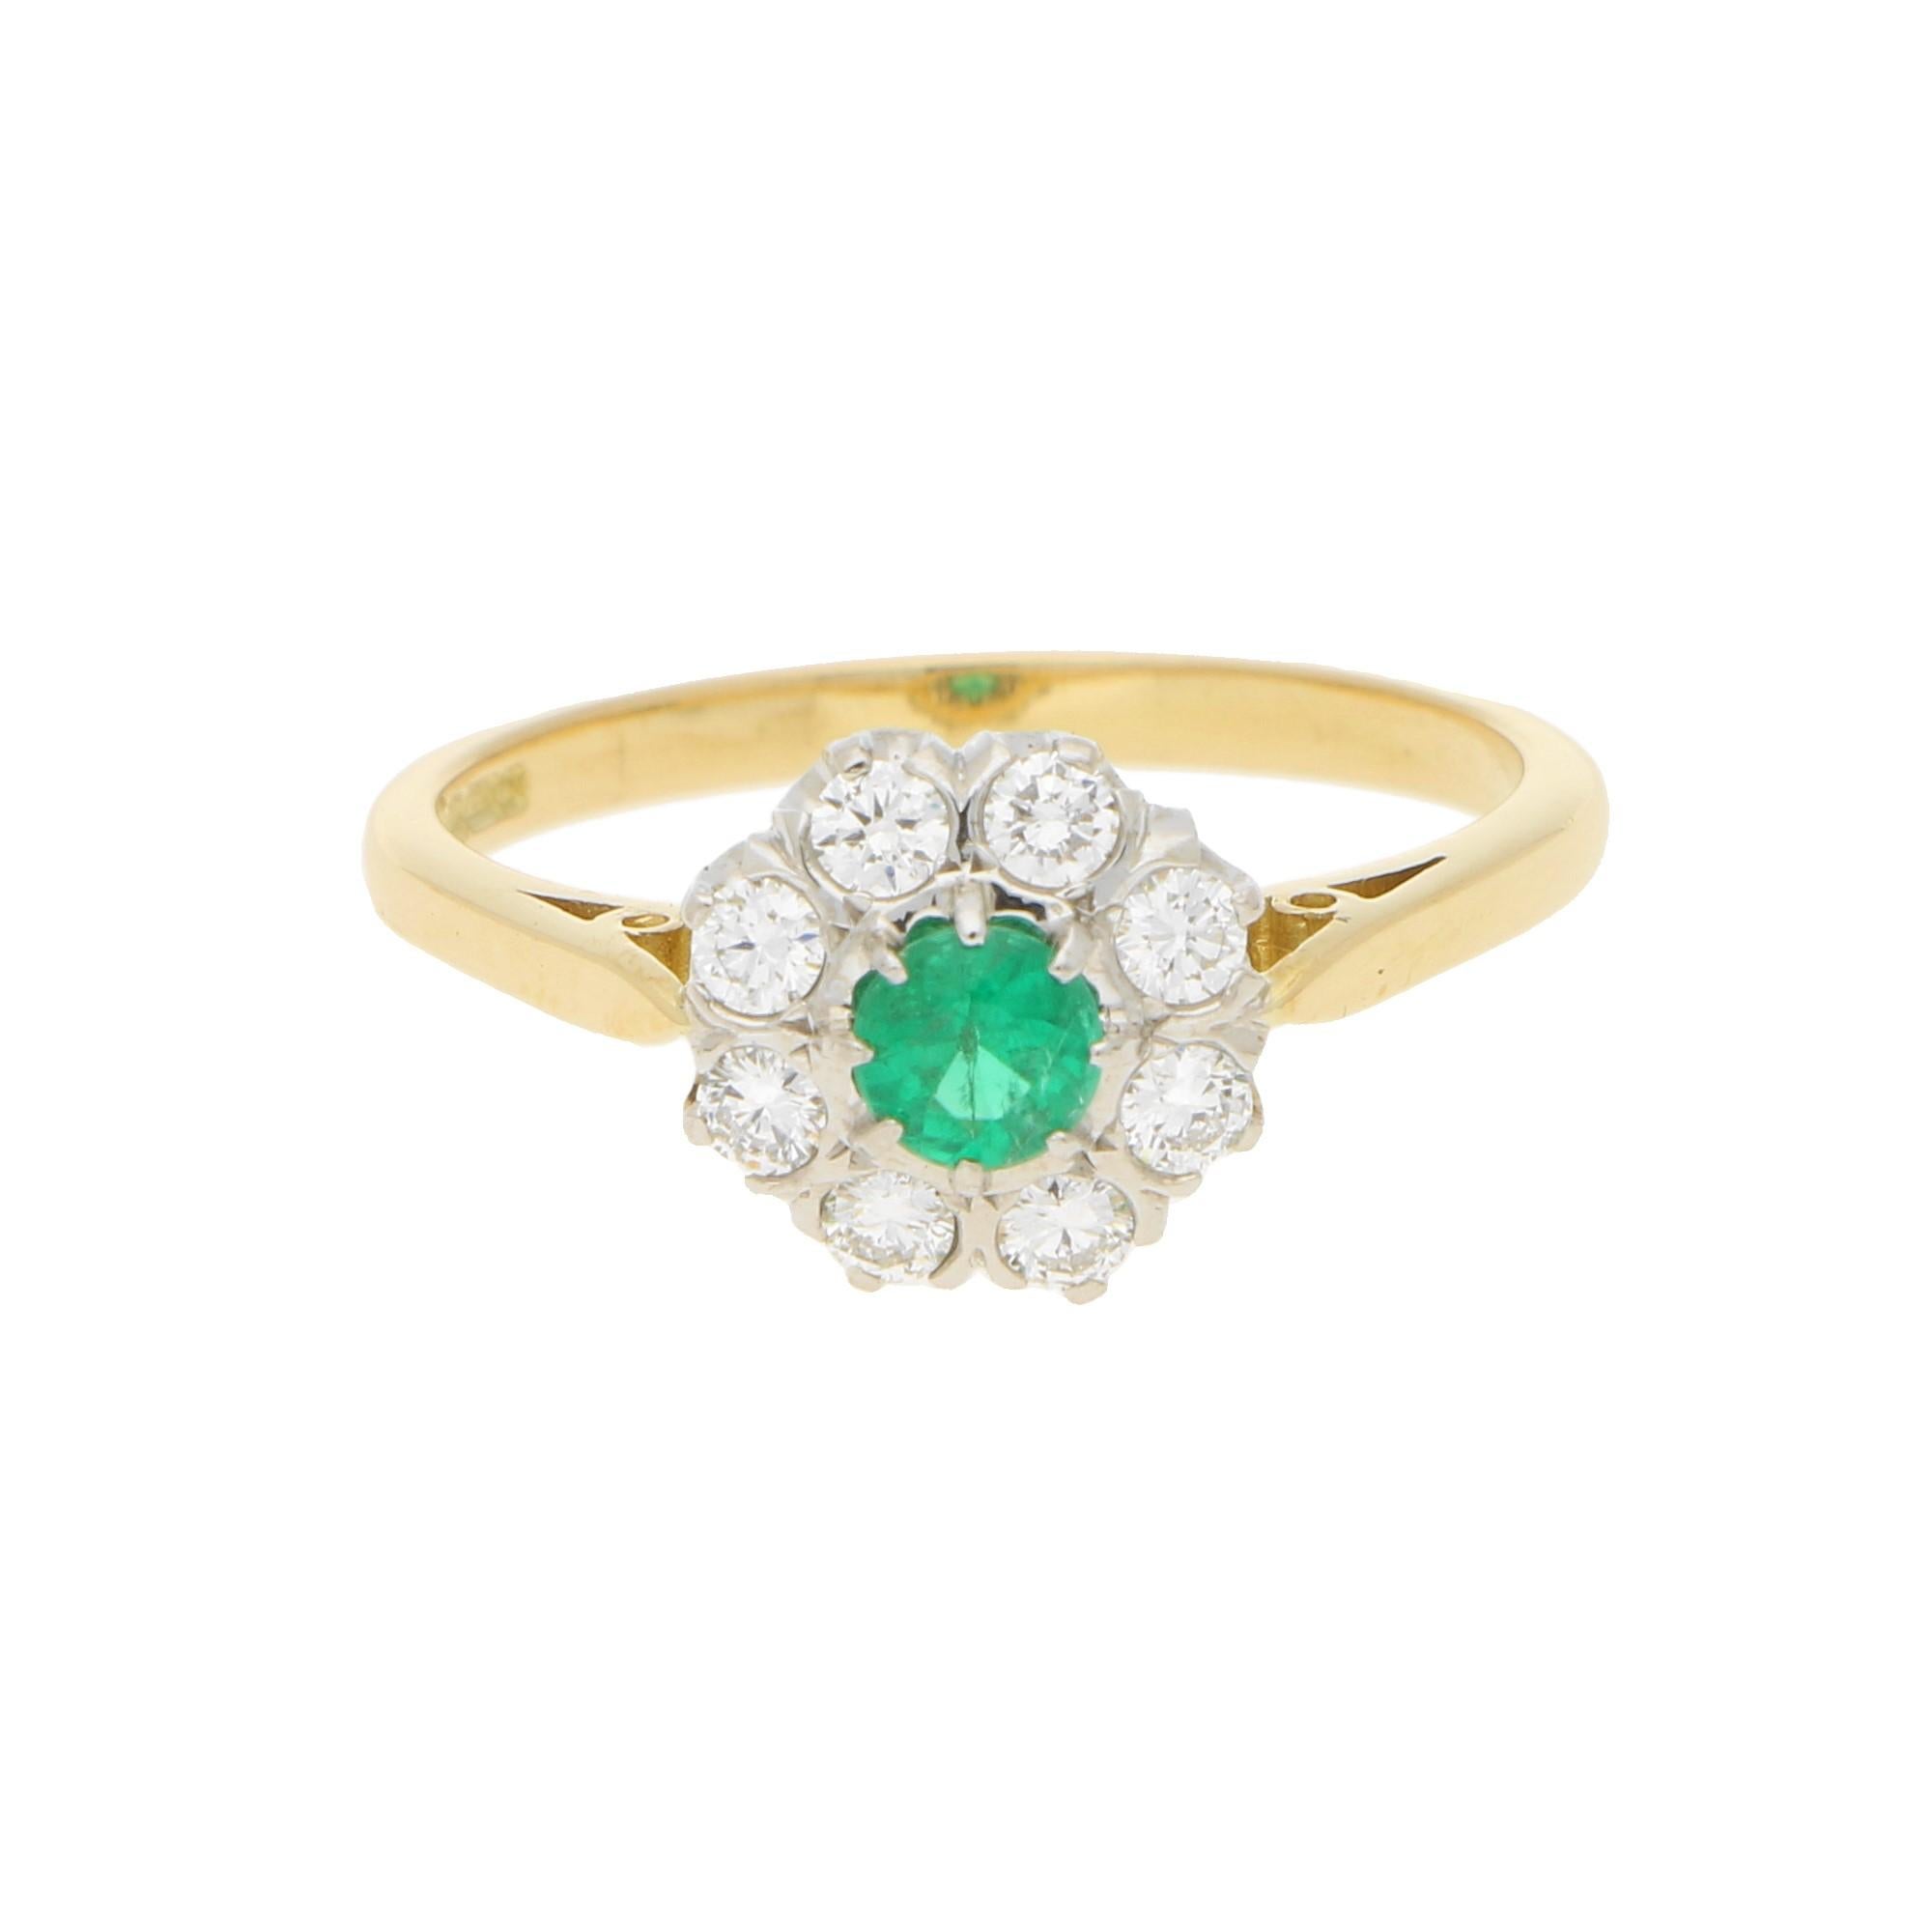 A beautiful little emerald and diamond daisy cluster ring set in 18k yellow and white gold. 

The piece is centrally set with a vibrant round cut green emerald eight claw set in an open back slightly raised setting. The emerald is the surrounded by